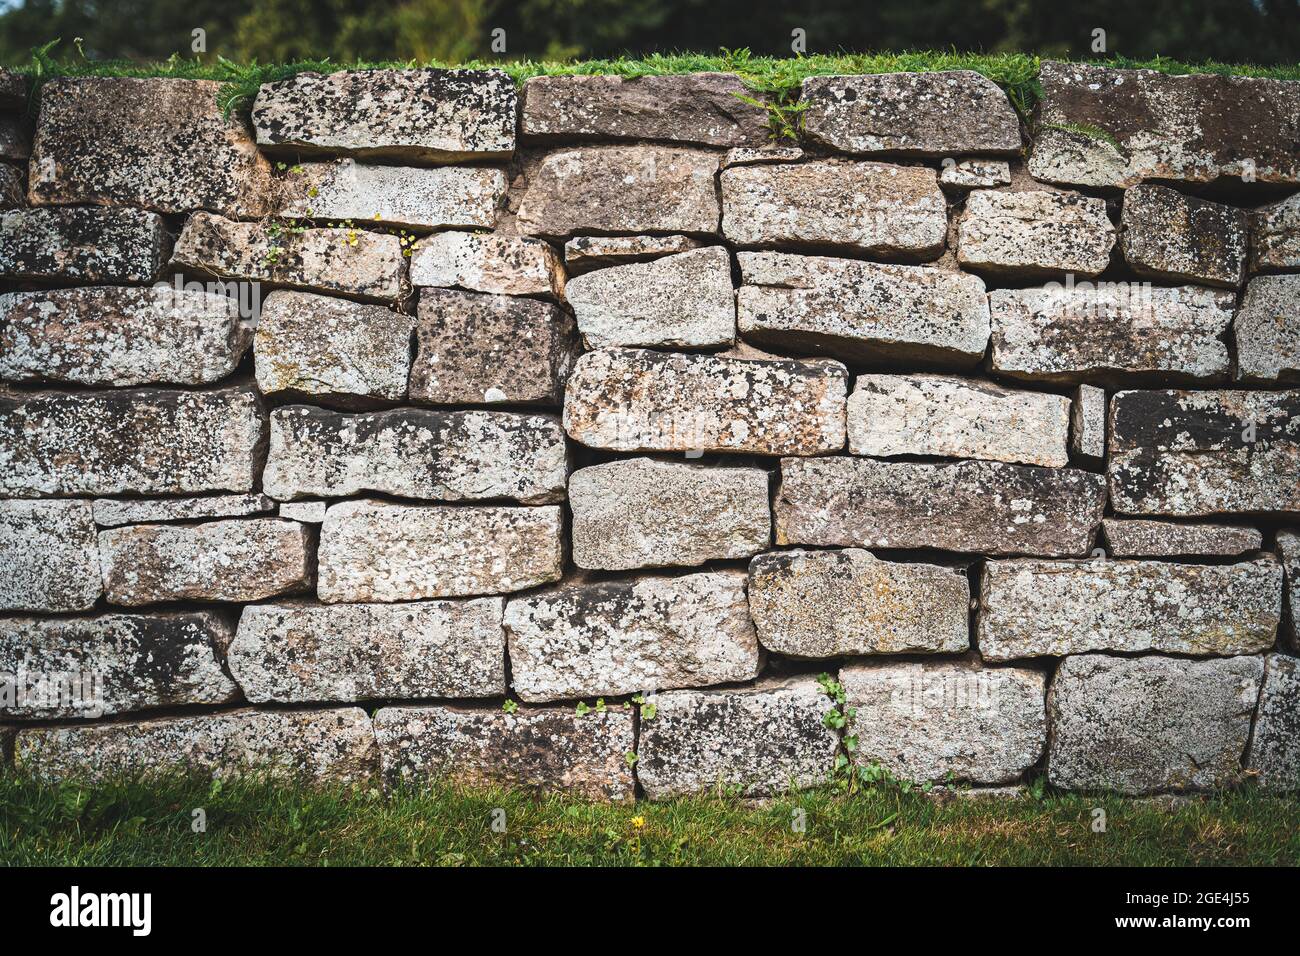 Old wall made of coarse stone framed by some green grass Stock Photo